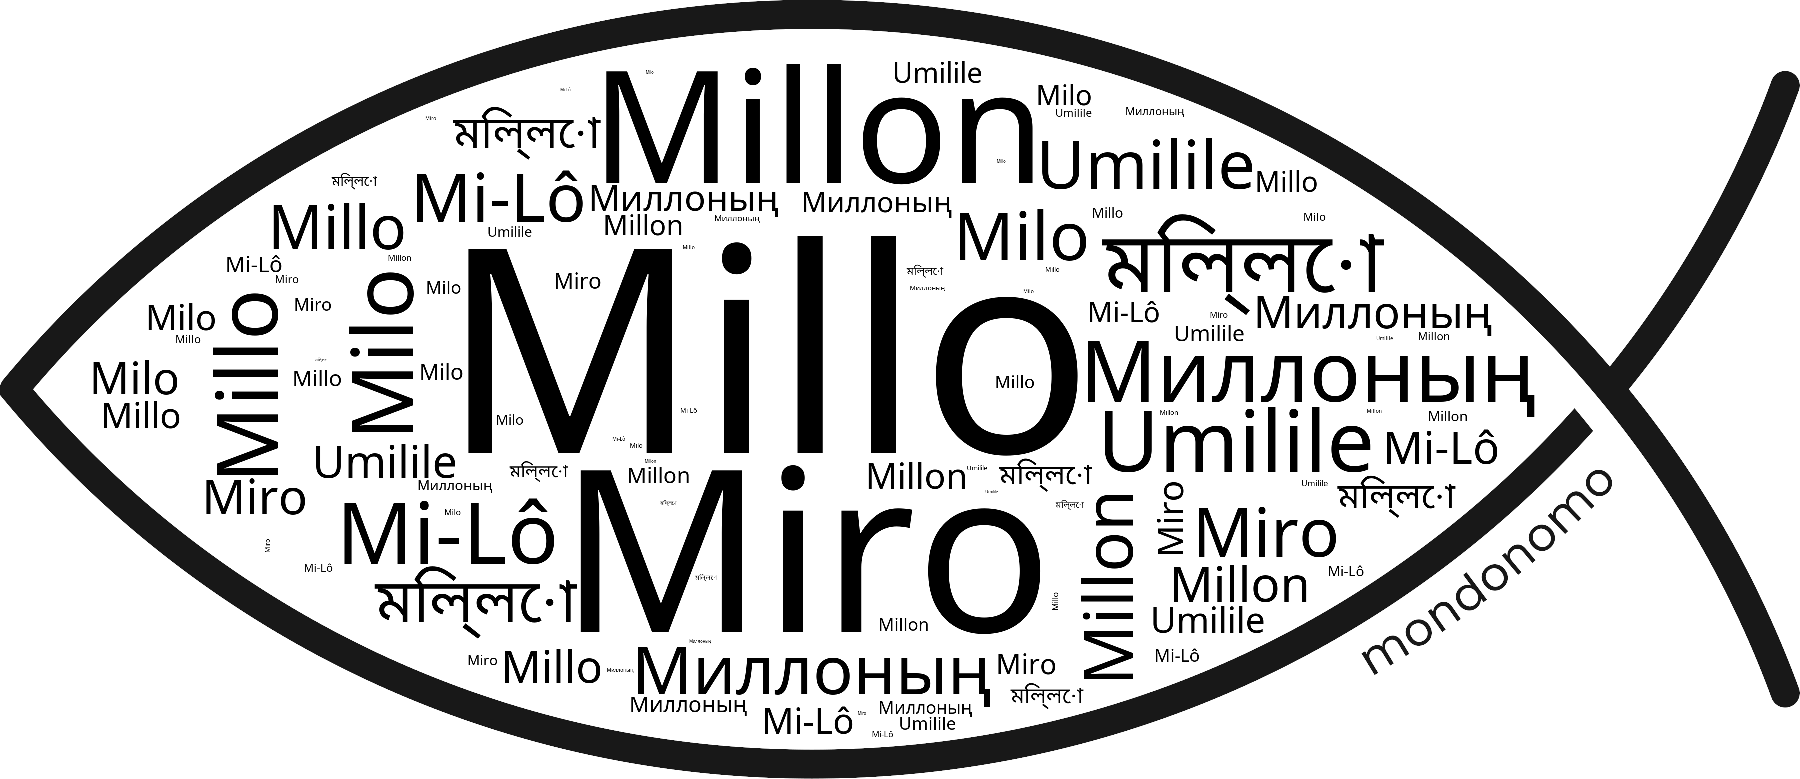 Name Millo in the world's Bibles